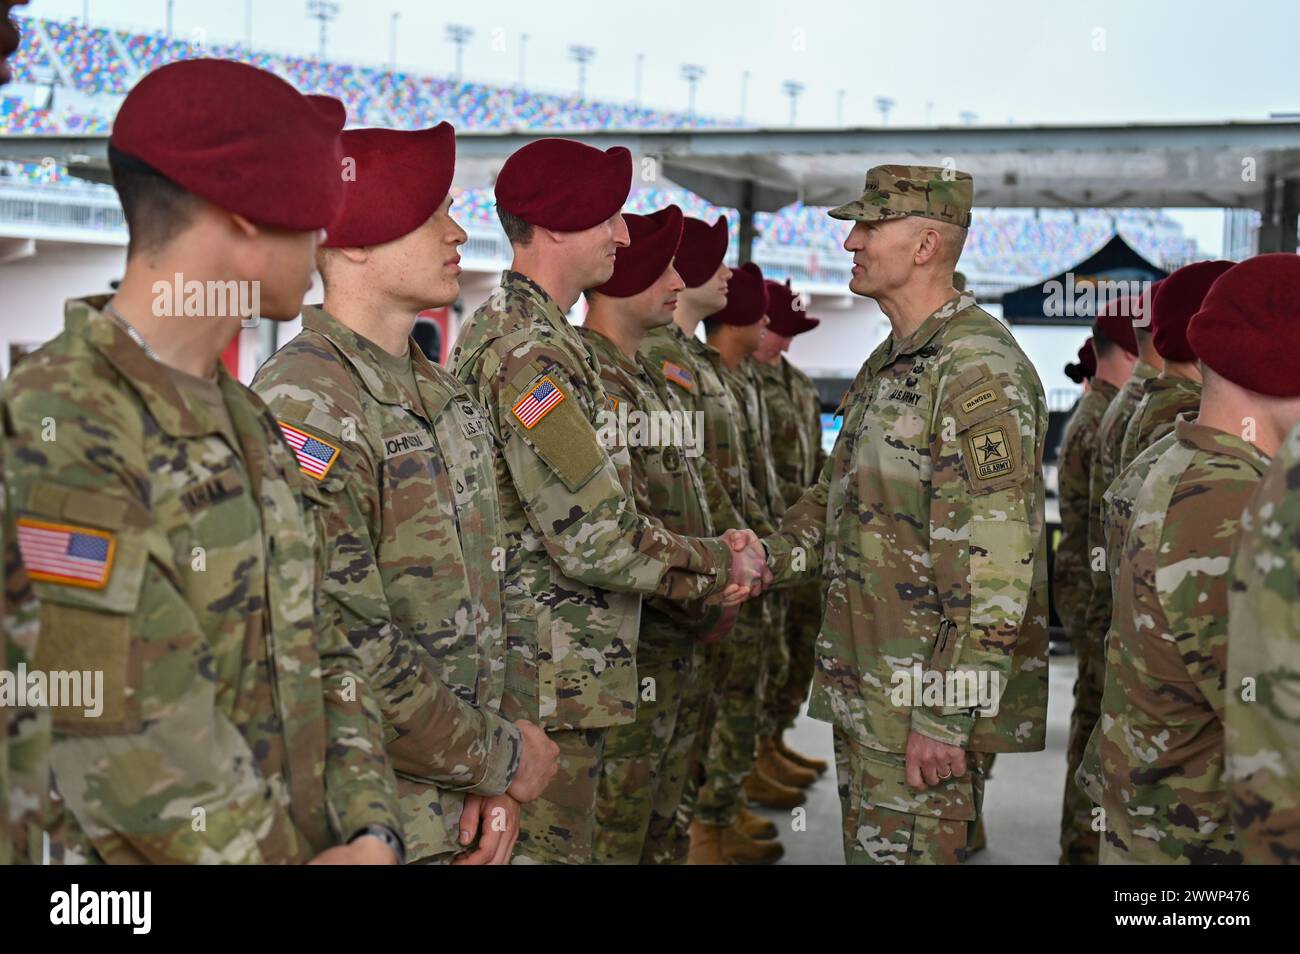 General Randy George, Chief of Staff of the Army, greets paratroopers from the U.S. Army 82nd Airborne Division 2nd Battalion, 505th Infantry Regiment during the 2024 NASCAR Daytona 500 in Daytona Beach, Fla., Sunday, Feb. 18, 2024. The Daytona 500 is a 500-mile-long NASCAR Cup Series motor race held annually and is regarded as the most important and prestigious race on the NASCAR calendar. Stock Photo